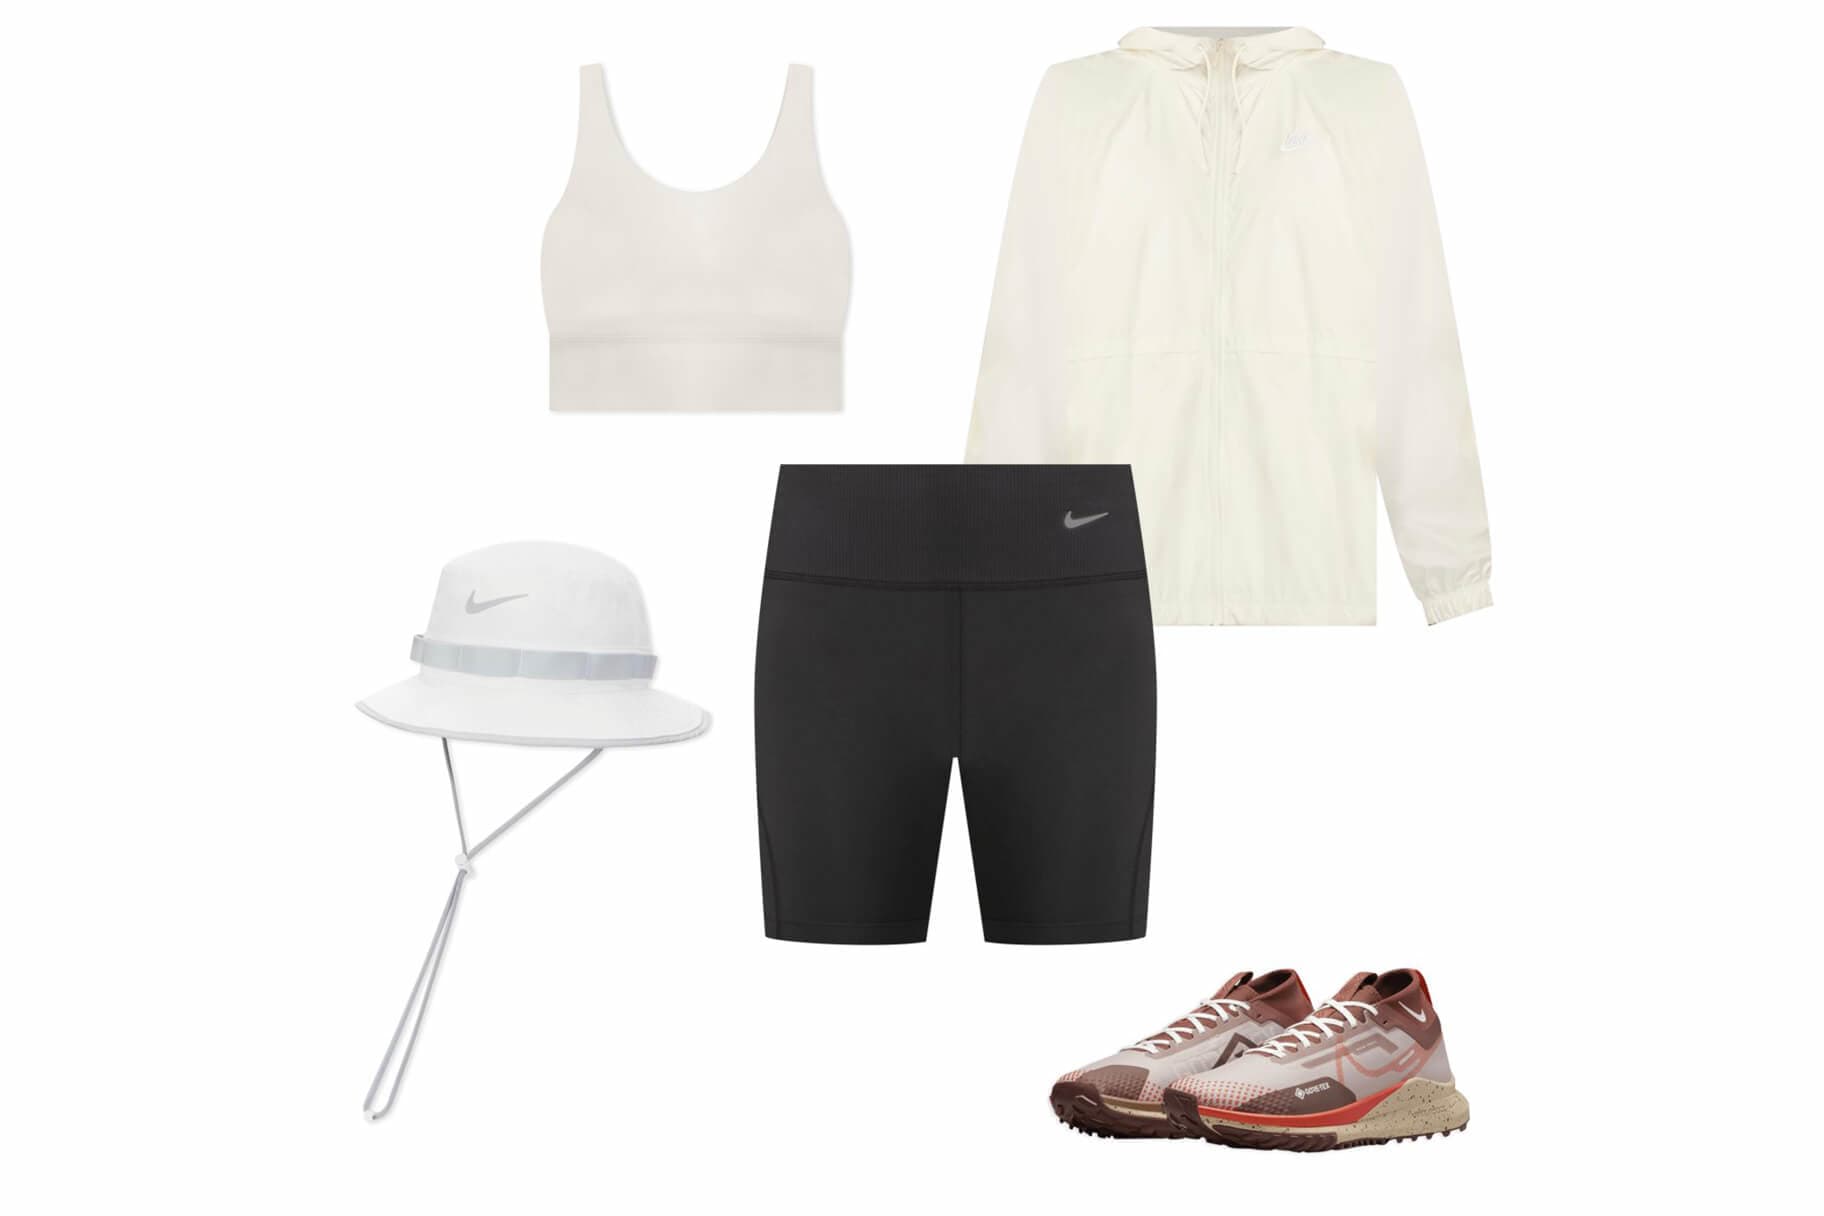 Outdoor Running Outfit Ideas  Running clothes, Fall running outfit, Outfits  petite